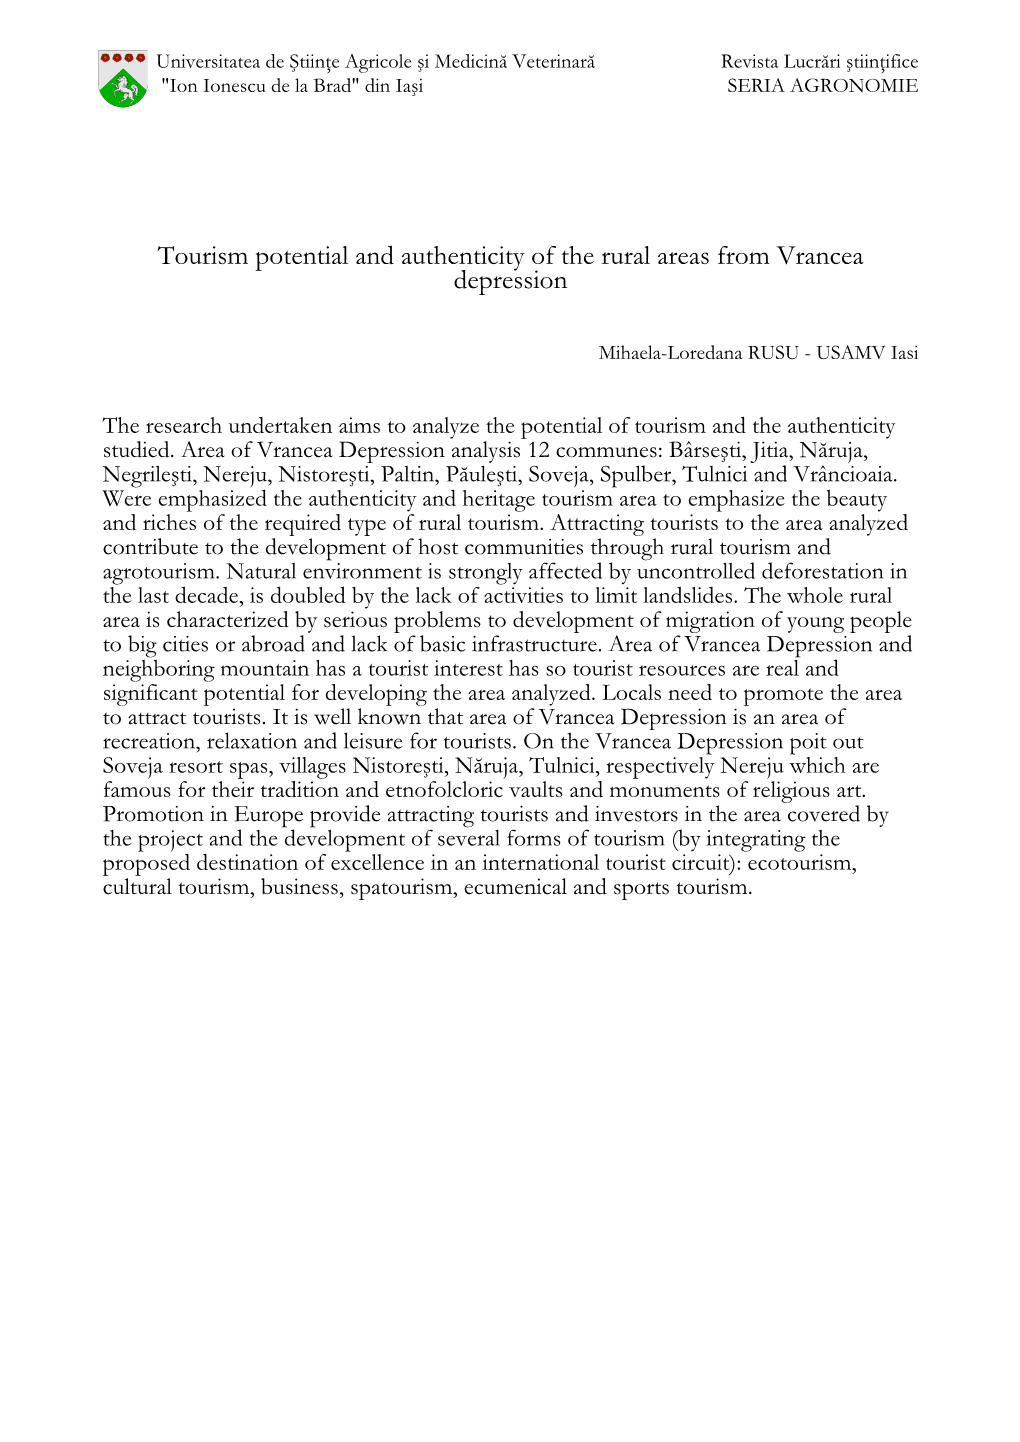 Tourism Potential and Authenticity of the Rural Areas from Vrancea Depression